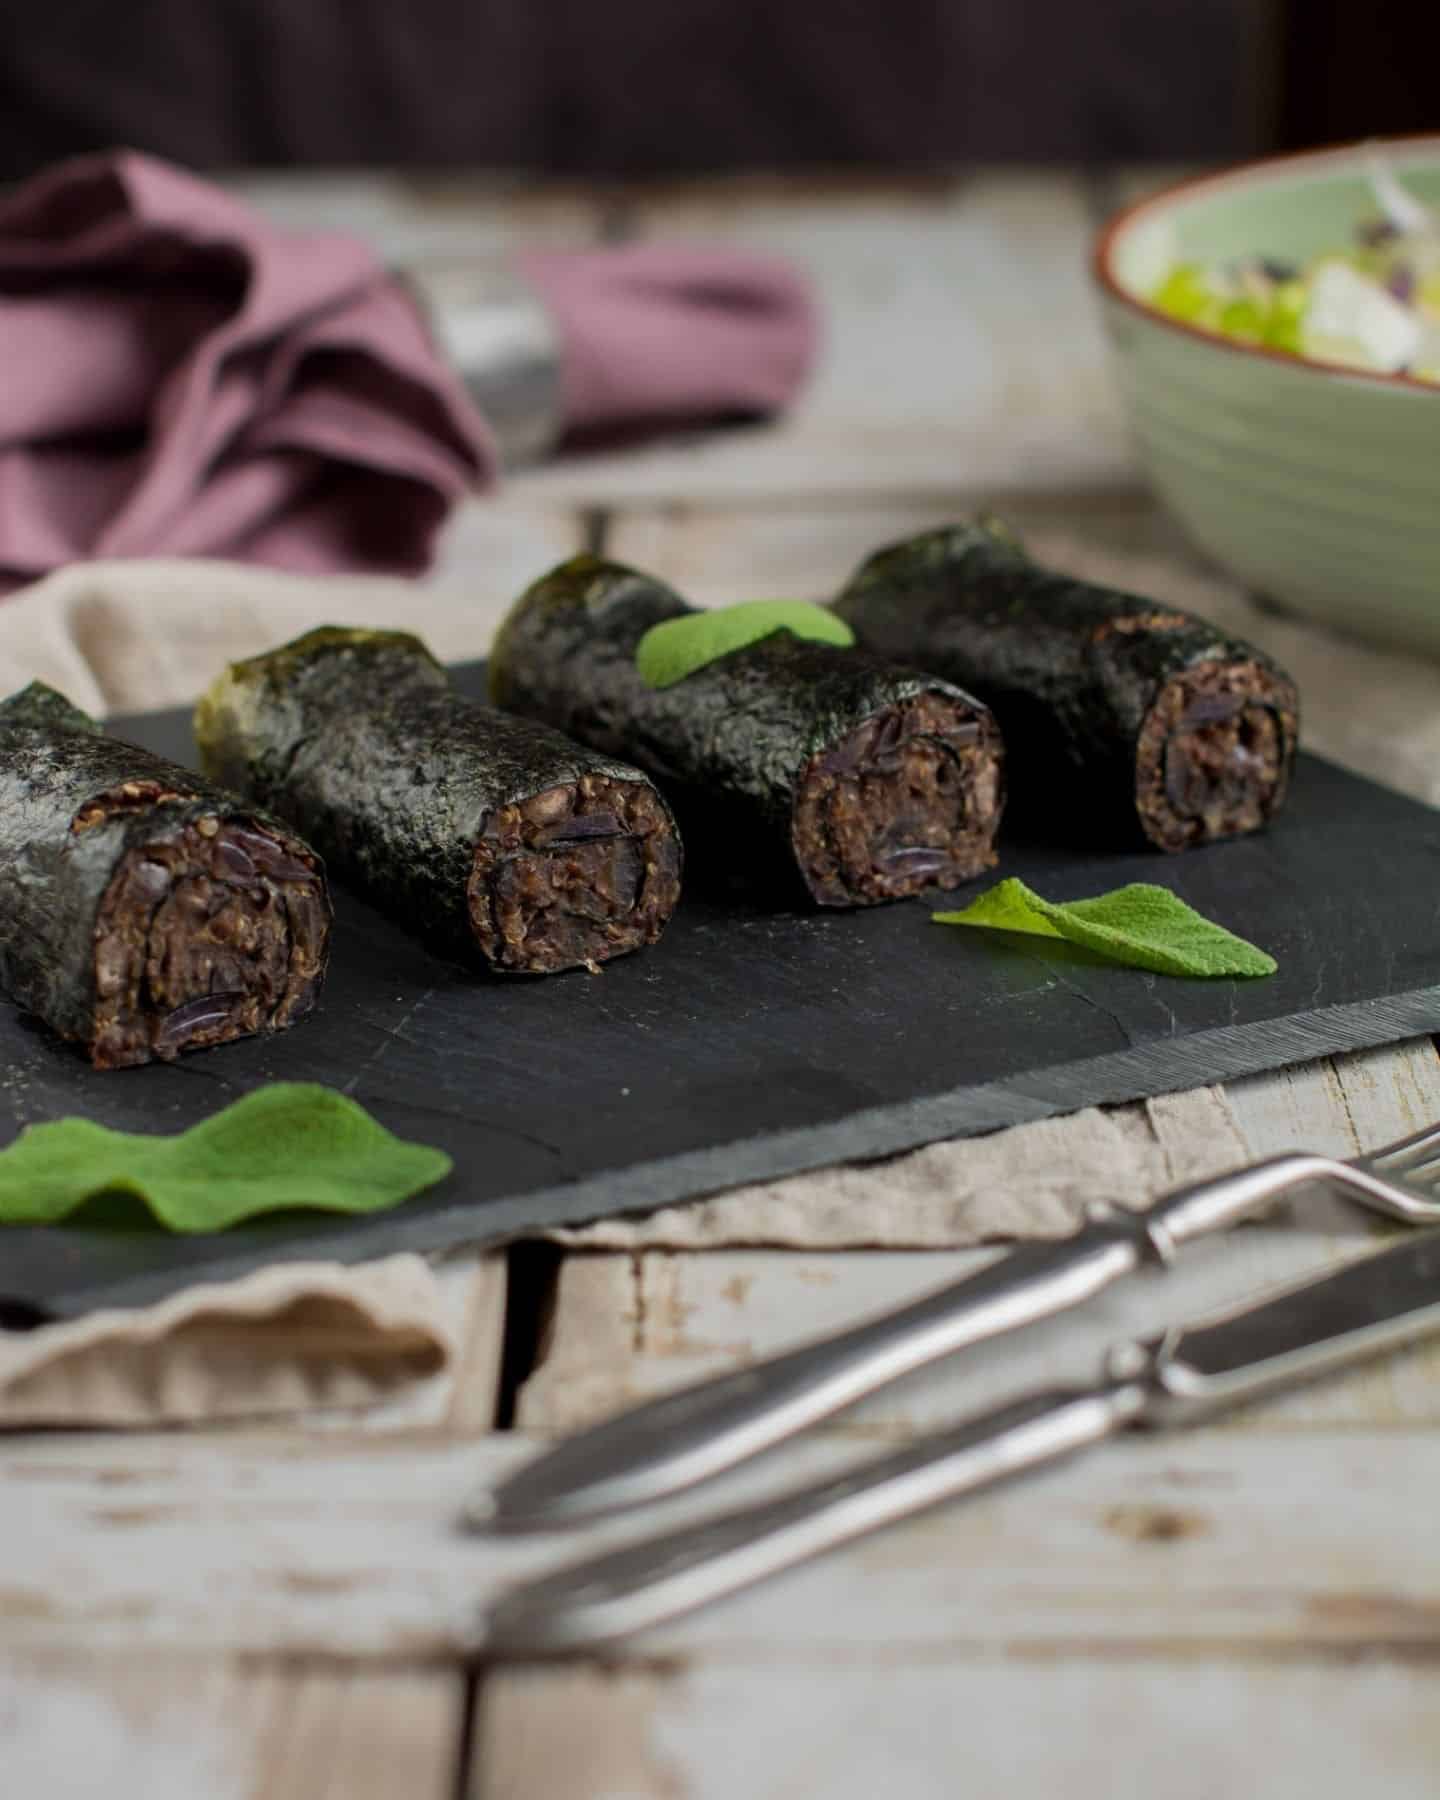 4 nori rolls filled with purple rice on a grey slate with a tea towel in the background